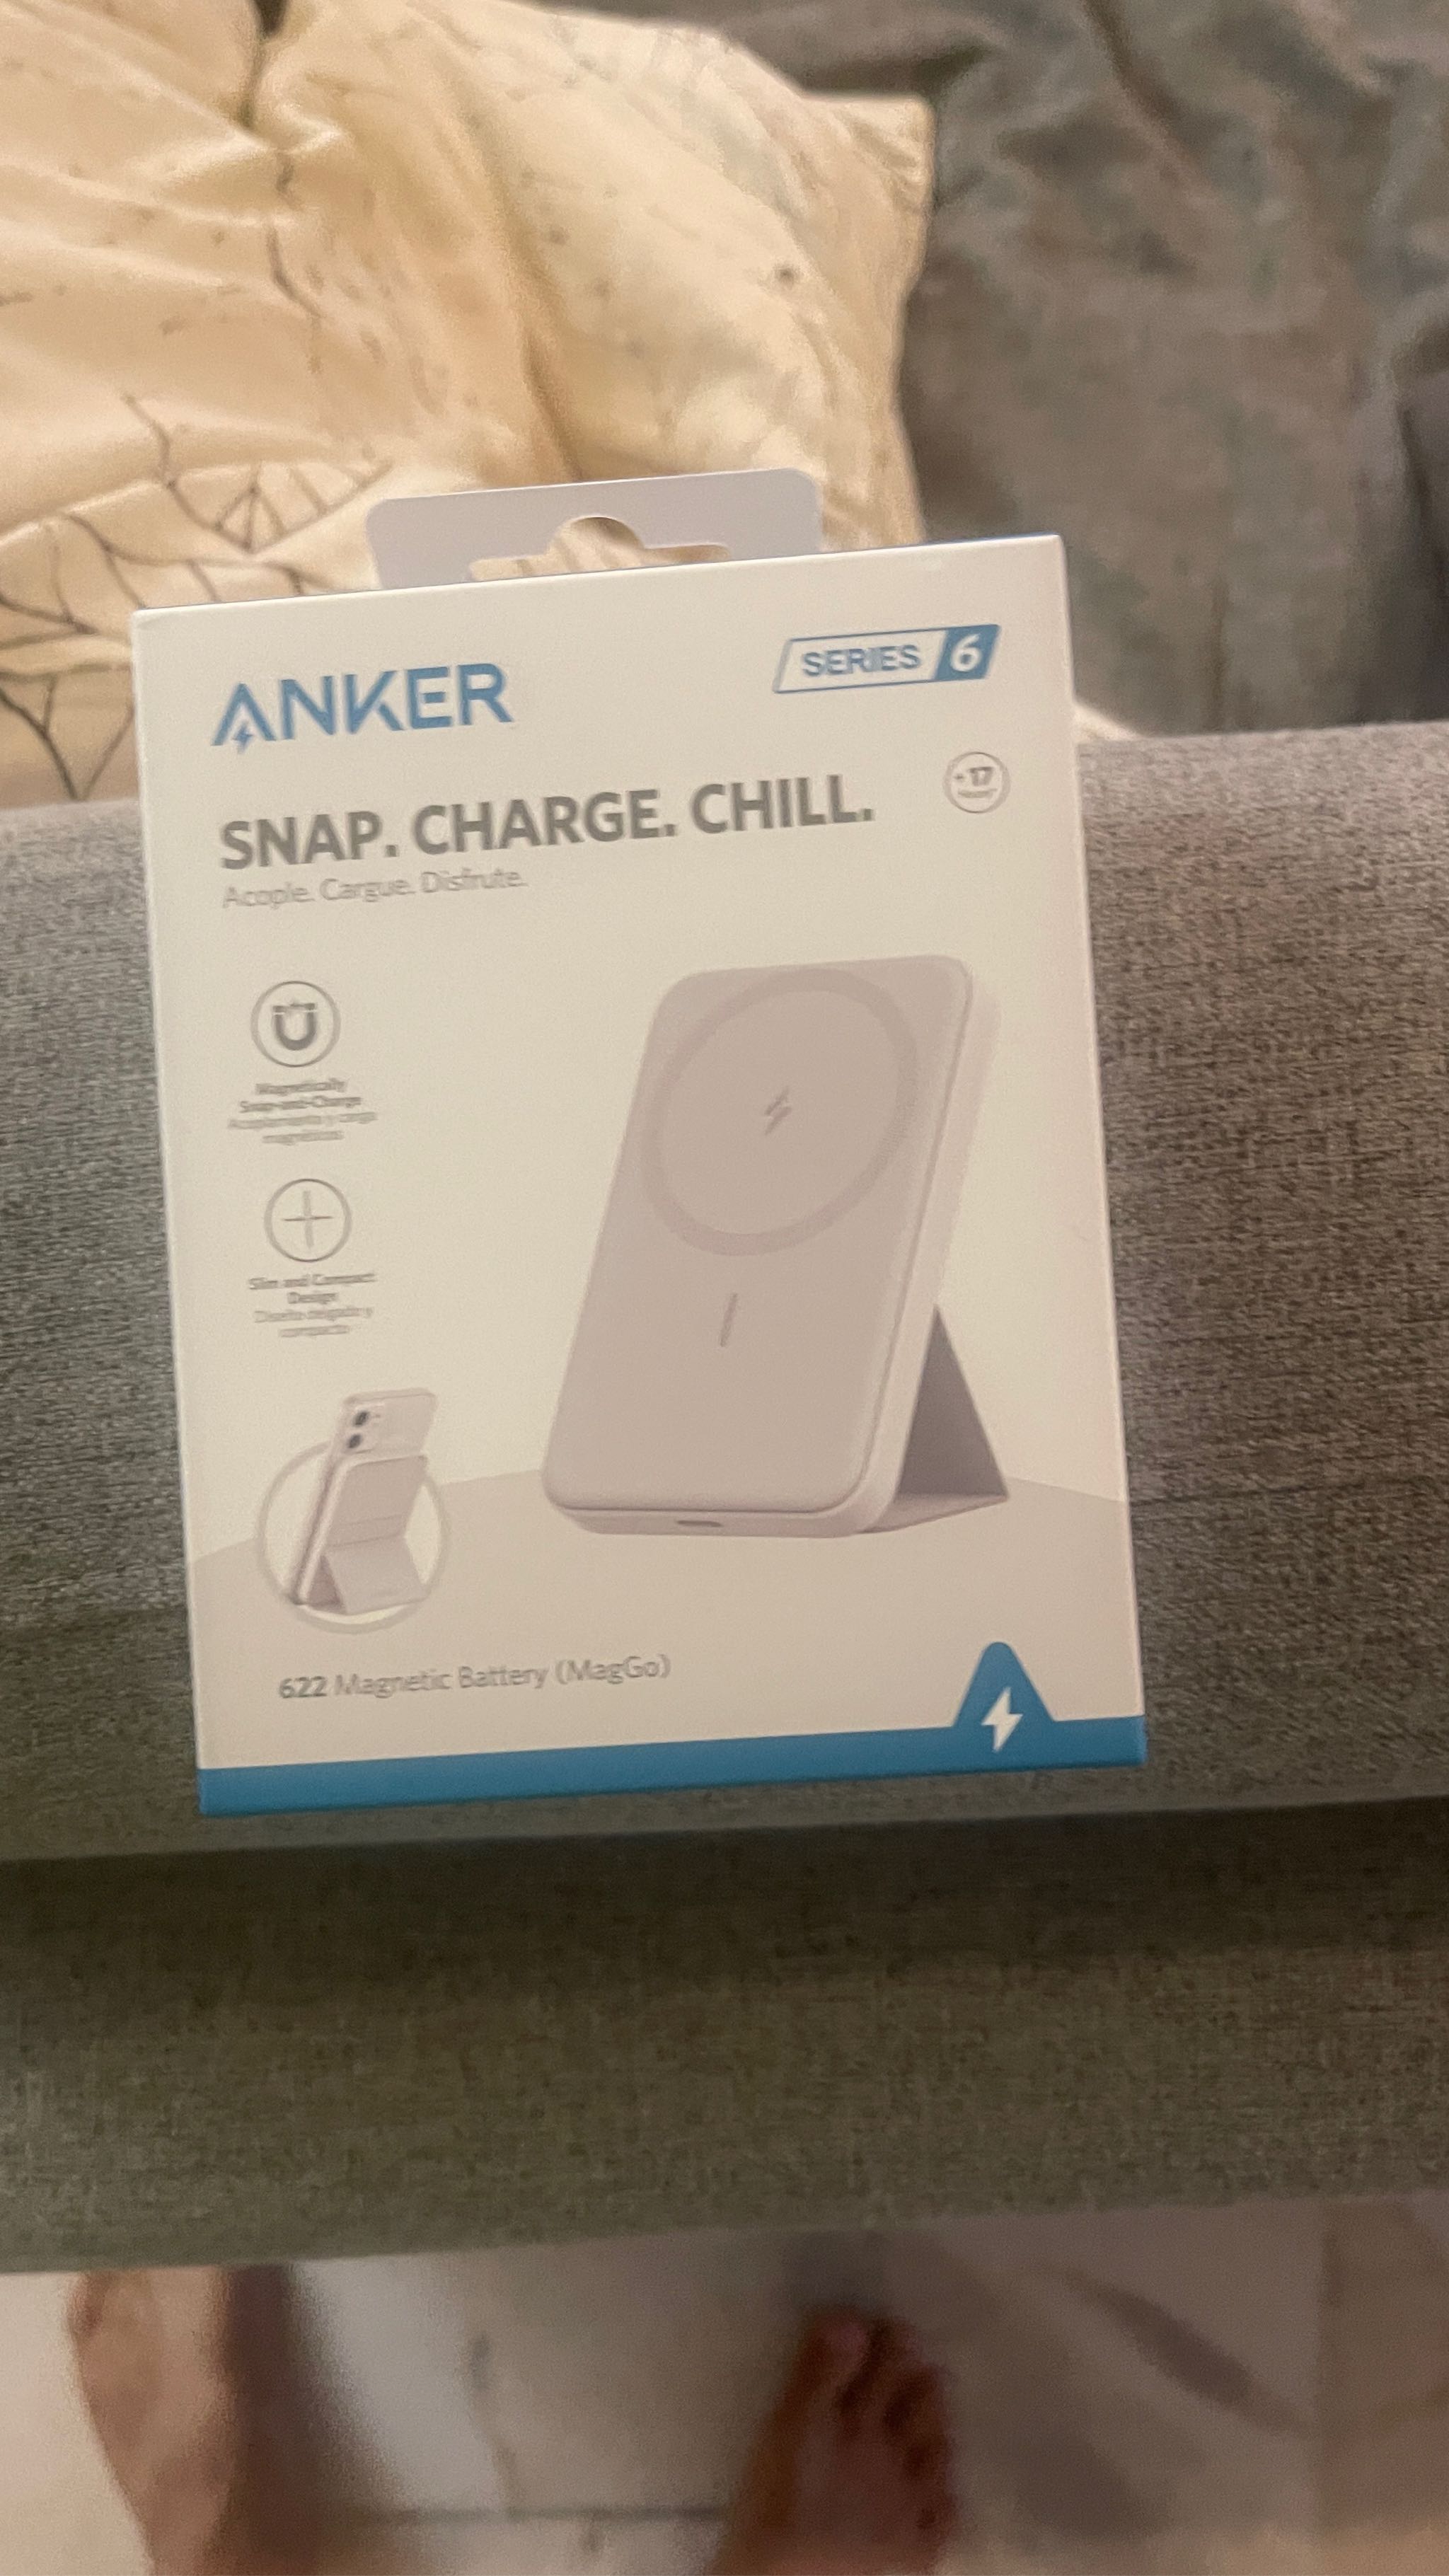 Anker 622 Magnetic Wireless Battery (MagGo) Snap Charge Chill - White